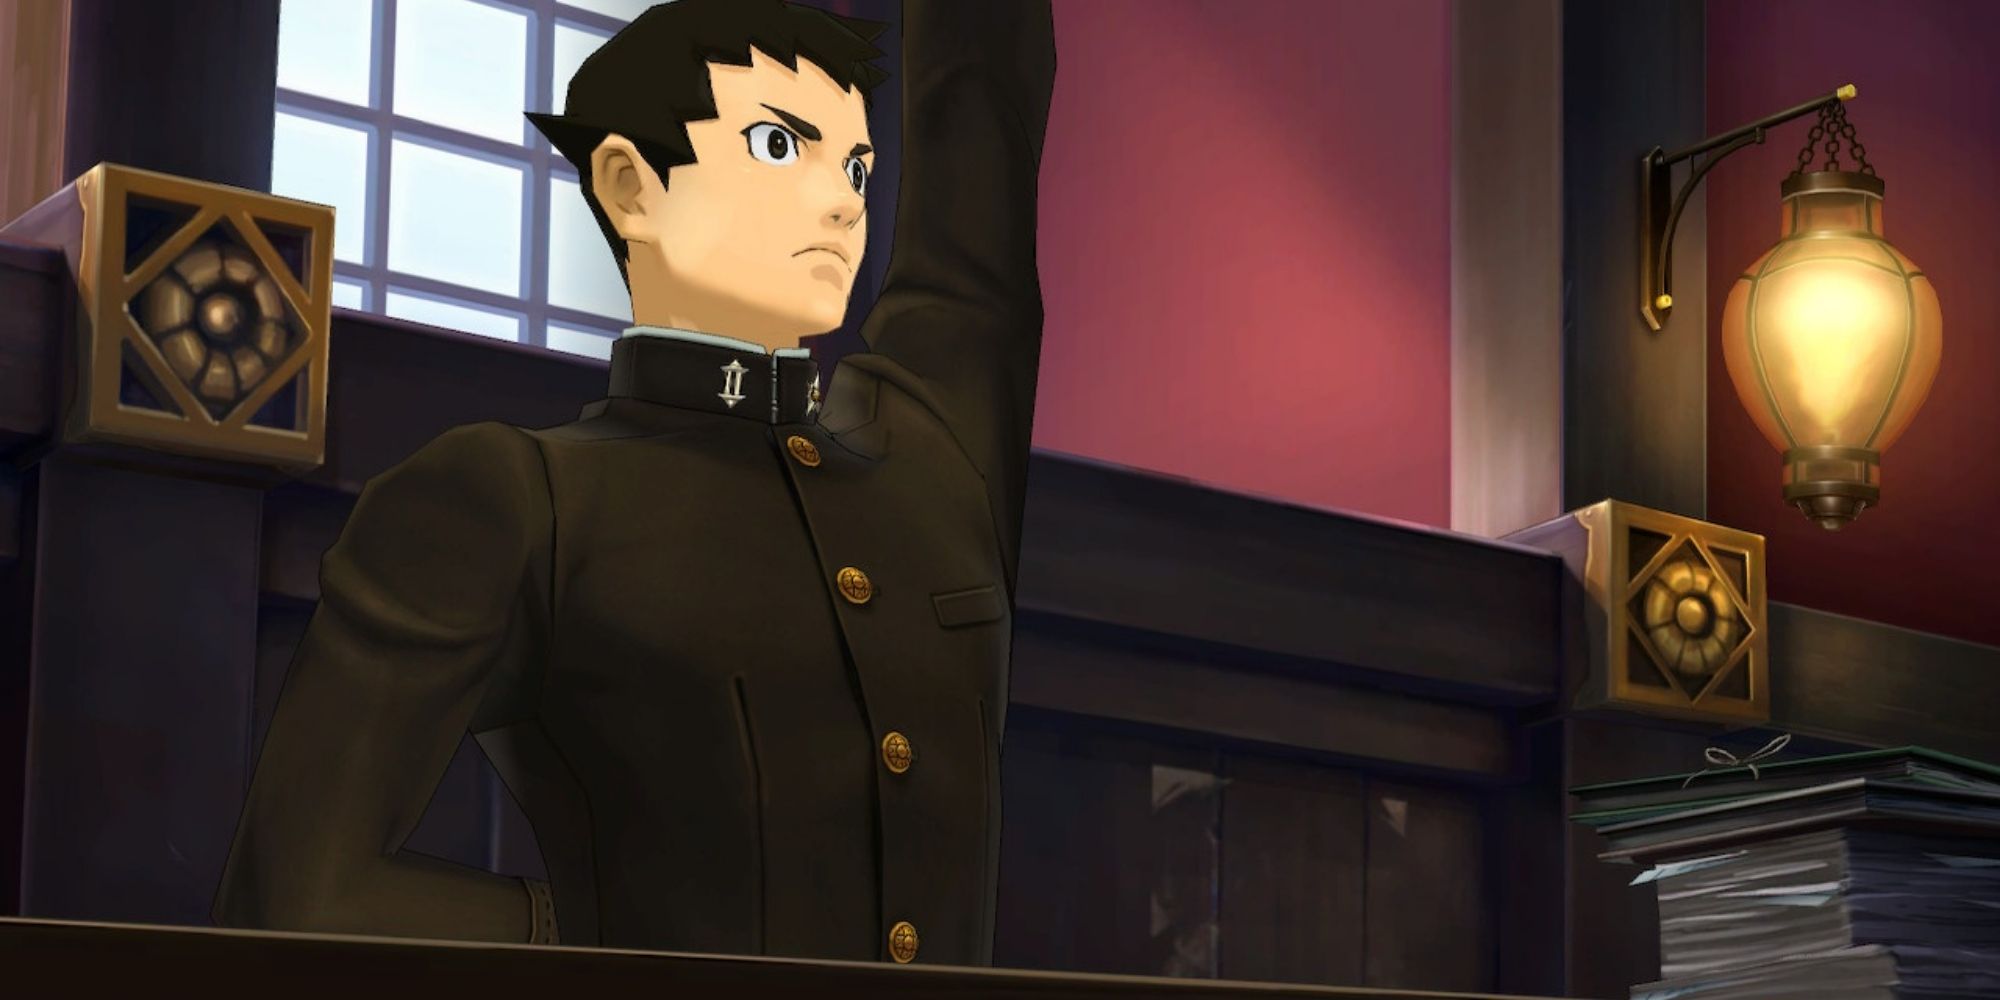 The great Chronicles ace lawyer Ryunosuke Naruhodo raises his hand in a Japanese courtroom